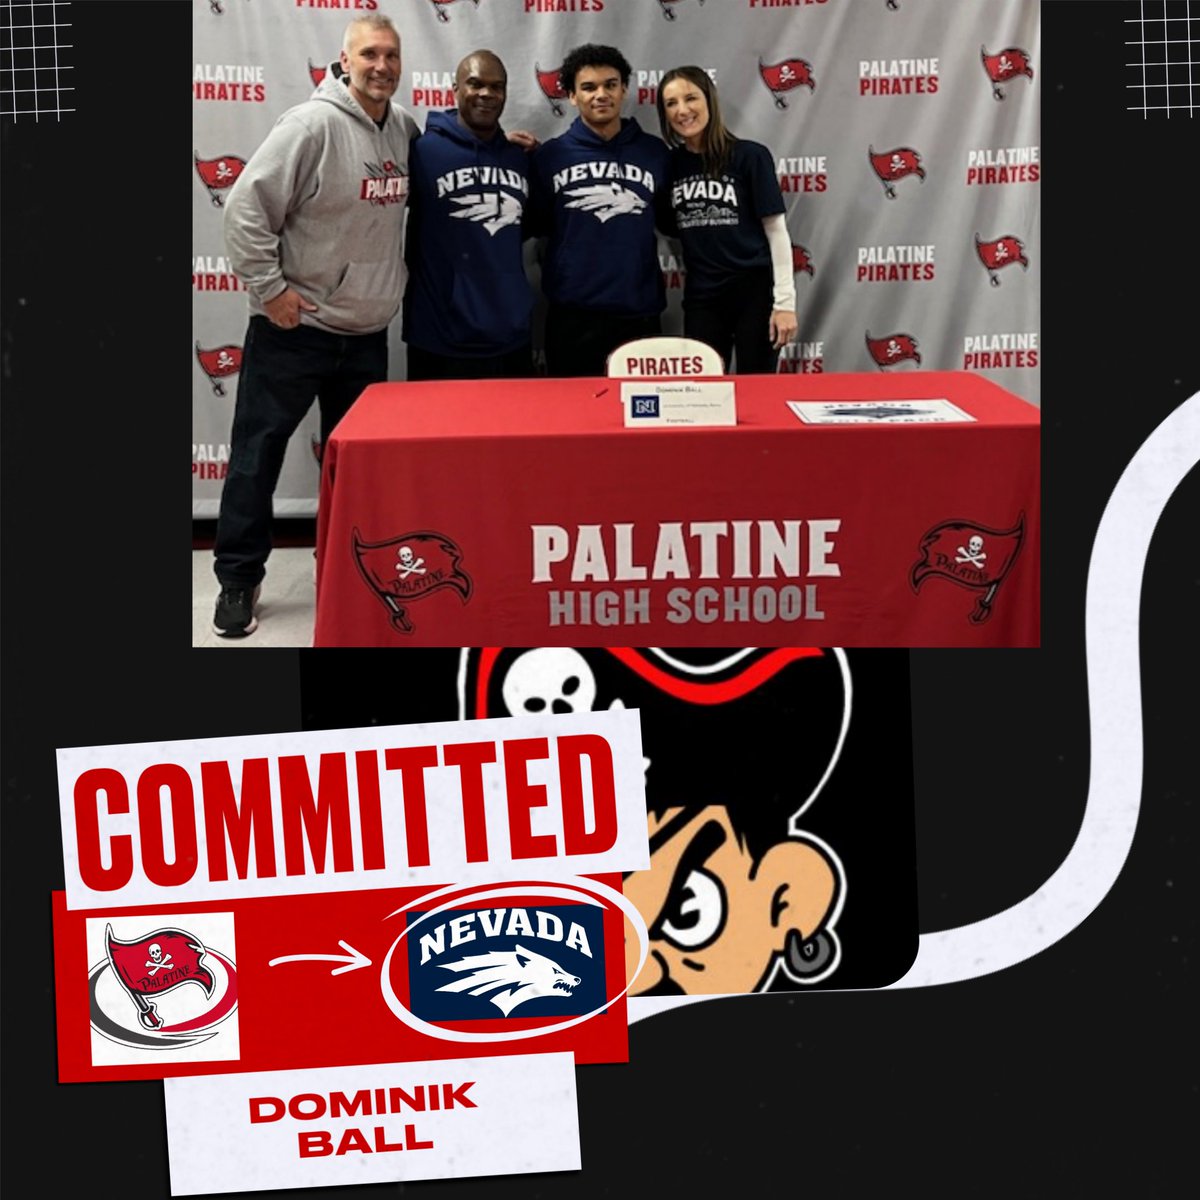 Congratulations to Dominik Ball who has committed to playing football at the University of Nevada! The Wolf Pack will now get to see the dynamic athlete we all got to witness for the last 4 years at Palatine High School. Good luck Dom!!